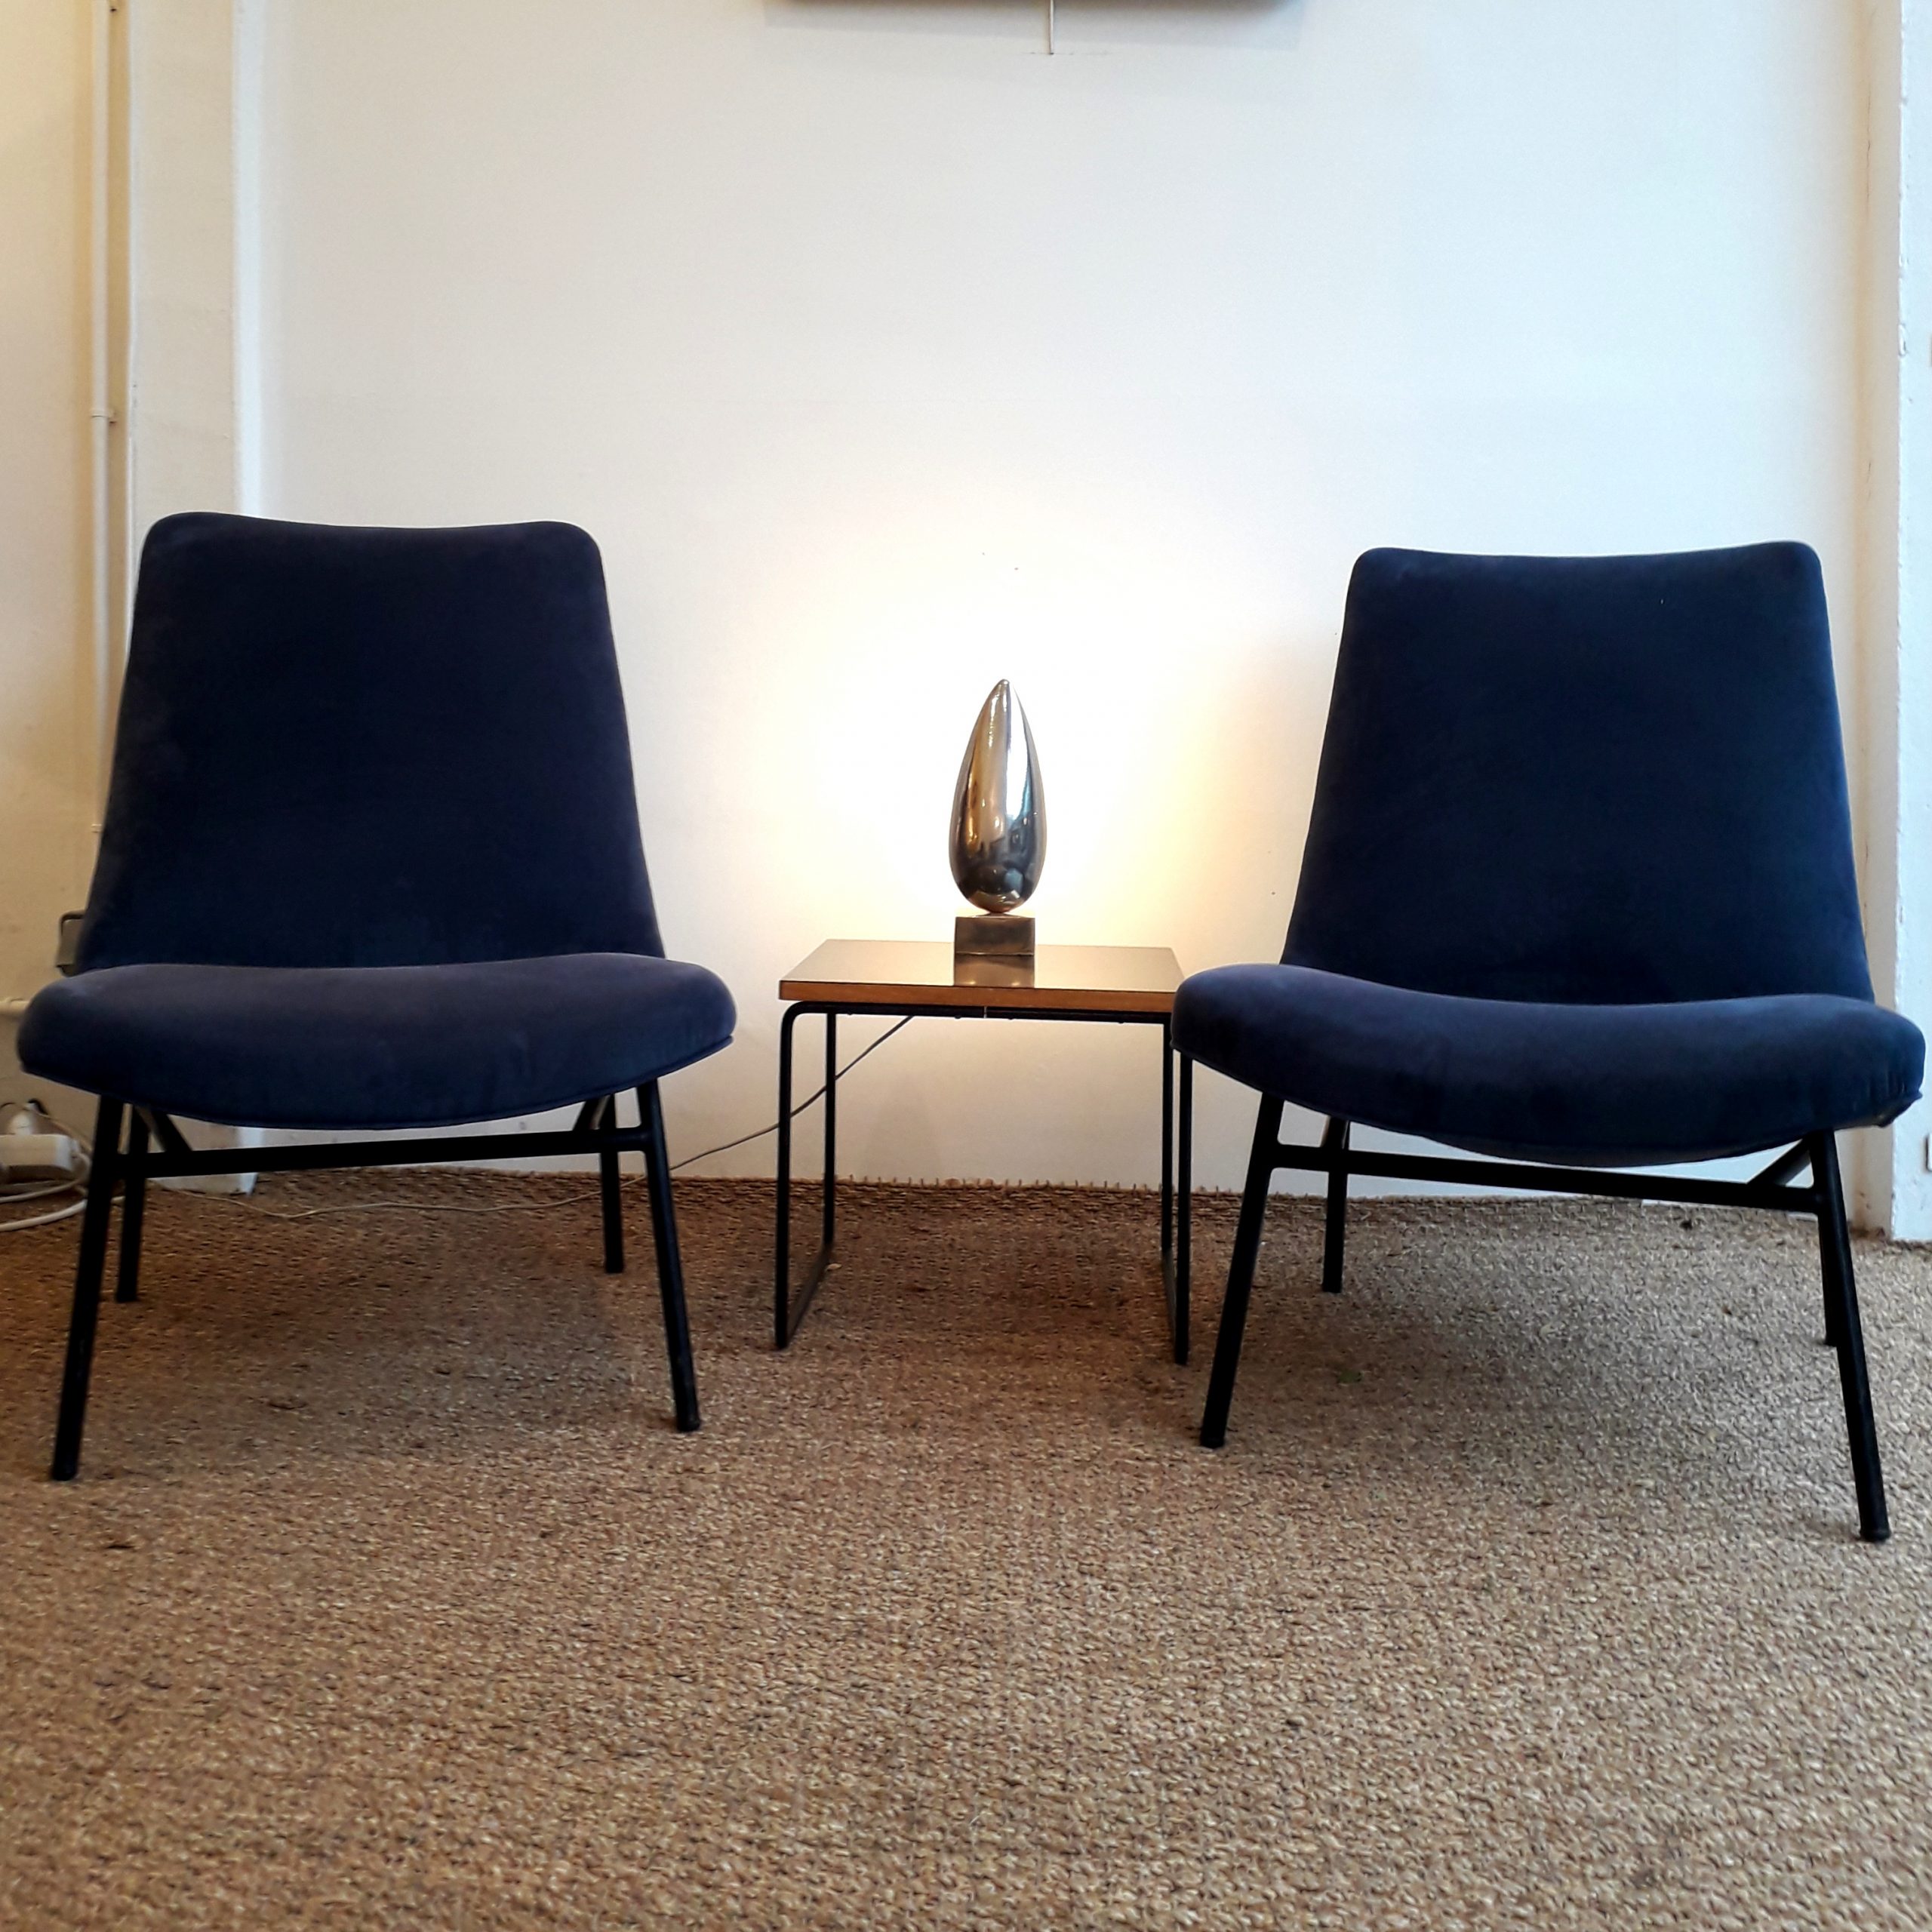 Pair Of Chairs Sk660 Pierre Guariche For Steiner, C. 1955 ... encequiconcerne Sk660